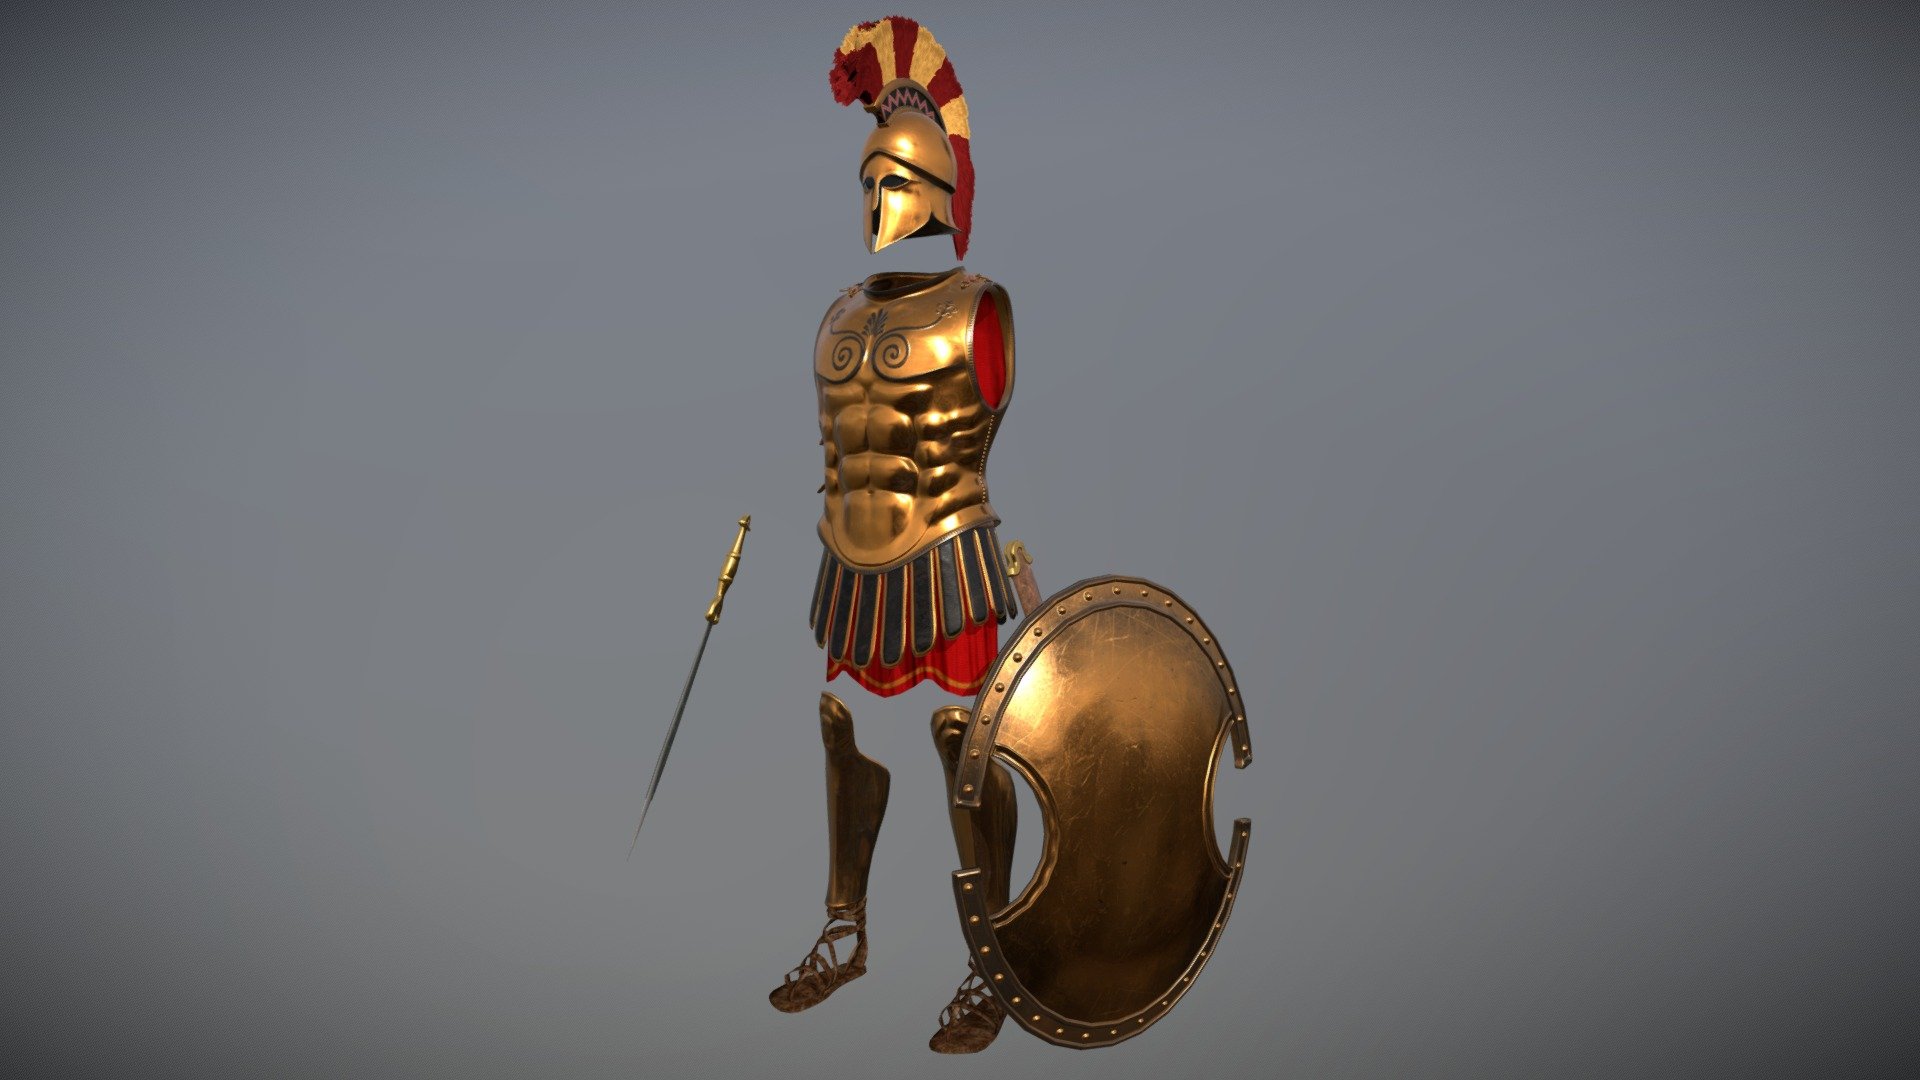 ancient spartan weapons and armor